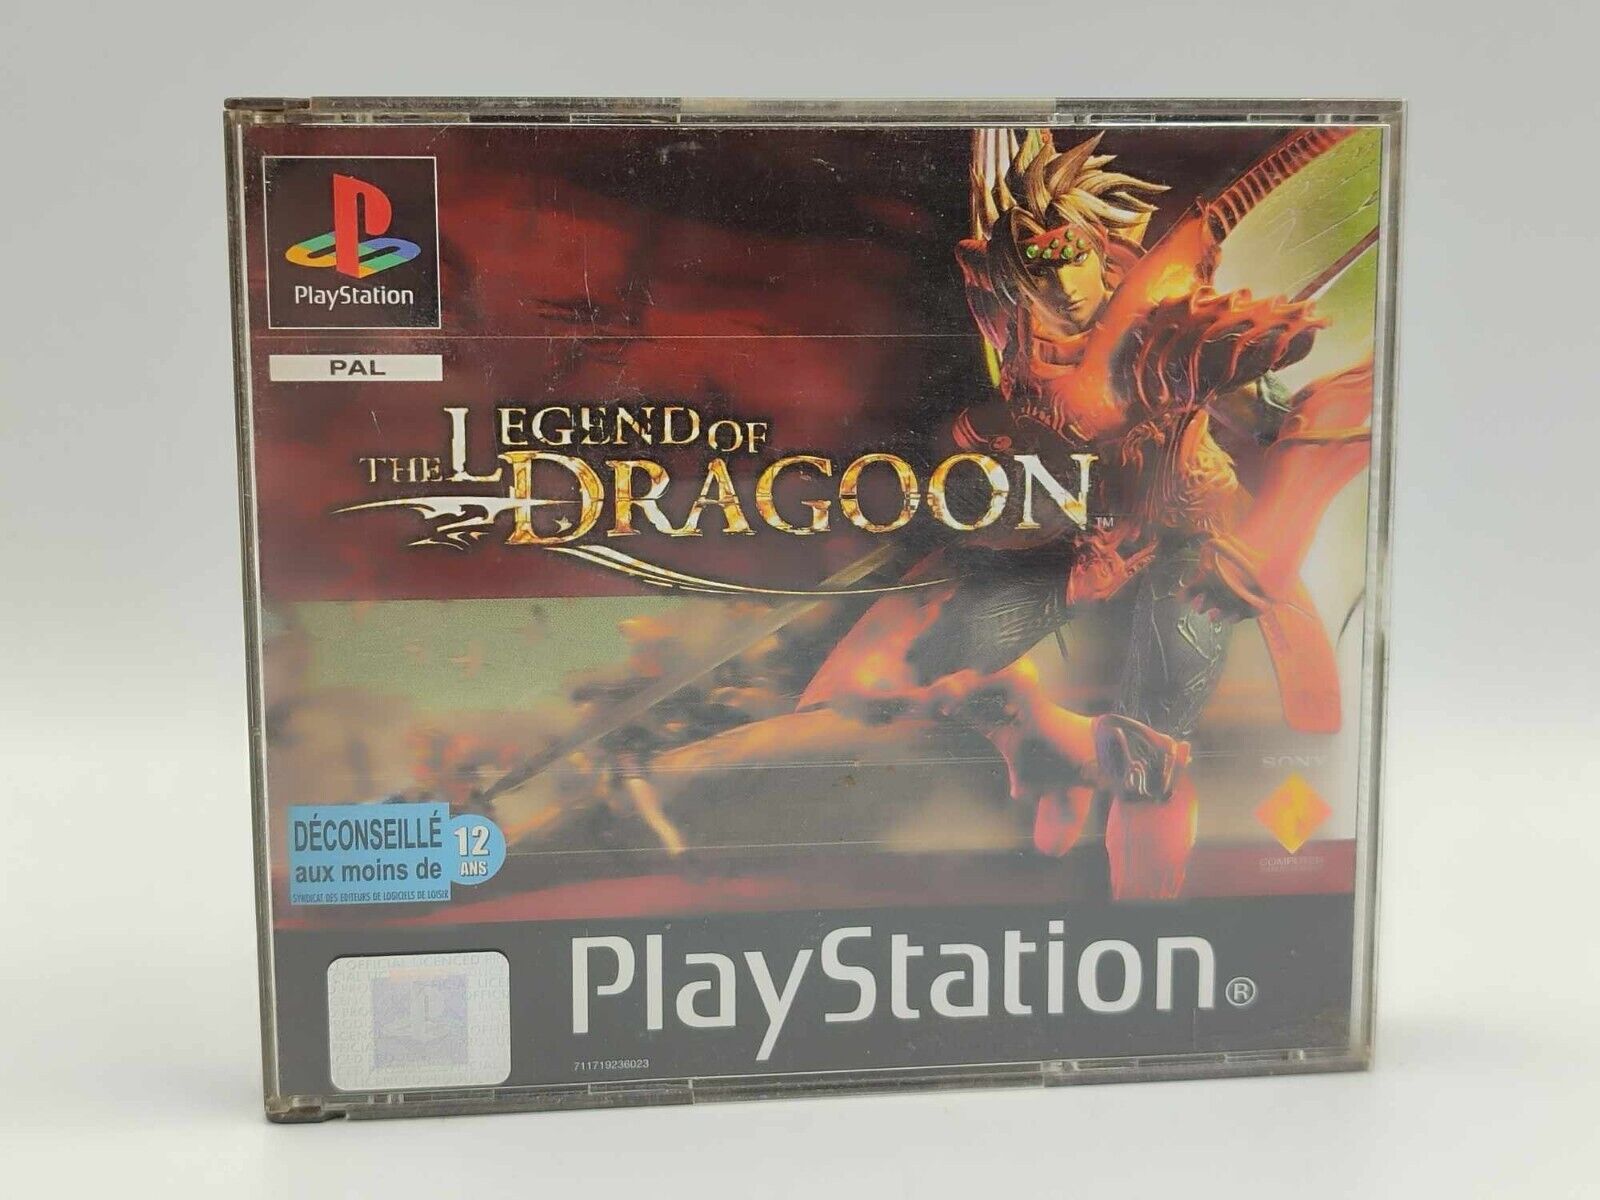 Jeu Sony Playstation 1 The Legend of Dragoon Complet 4 CD Notice PS1 PAL RPG